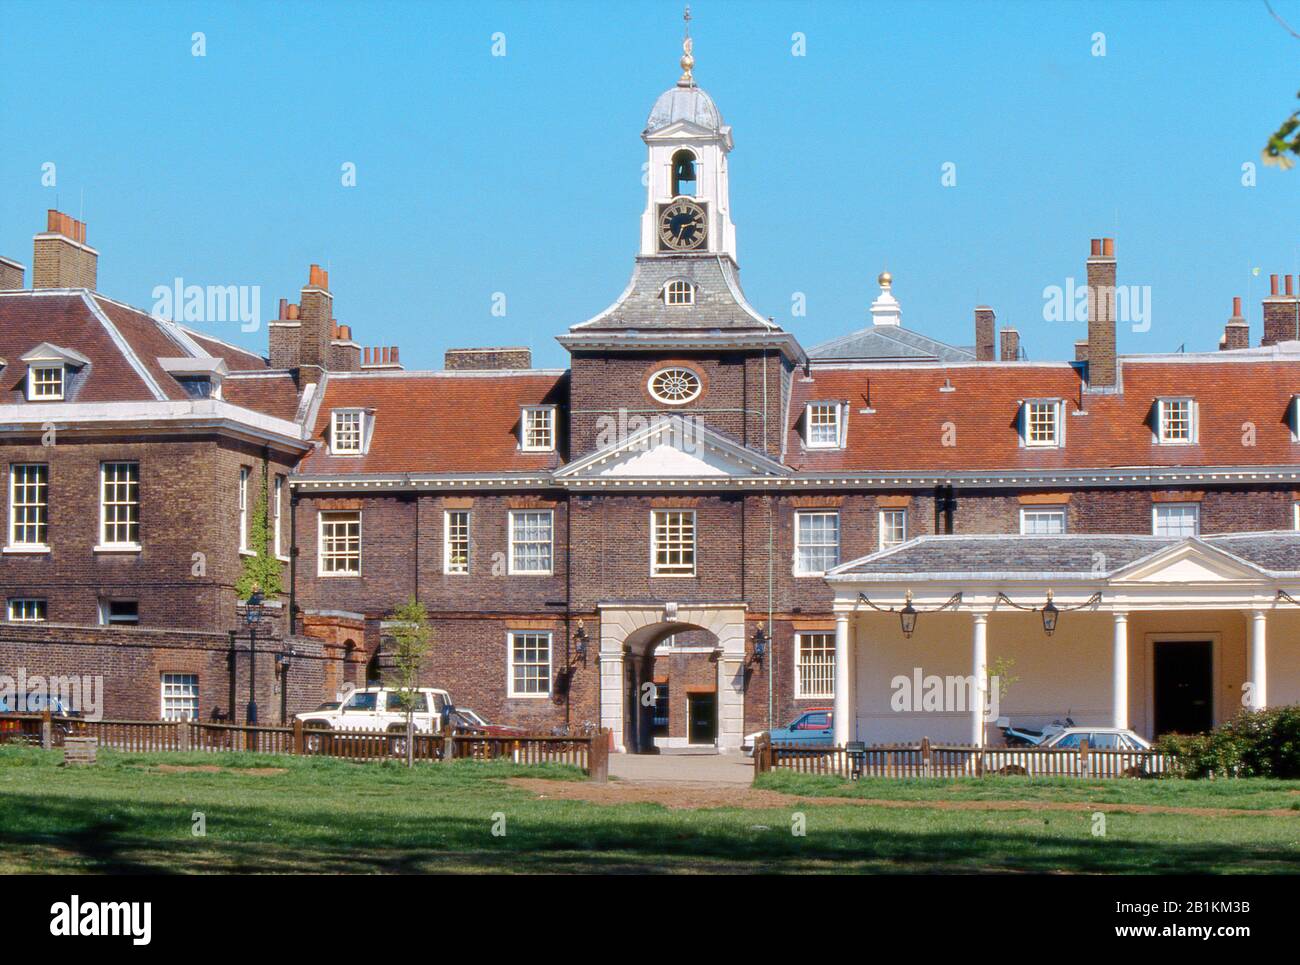 Kensington Palace, London, England. Kensington Palace was the home of HRH Diana, Princess of Wales and is now home to Duke and Duchess of Cambridge. Stock Photo